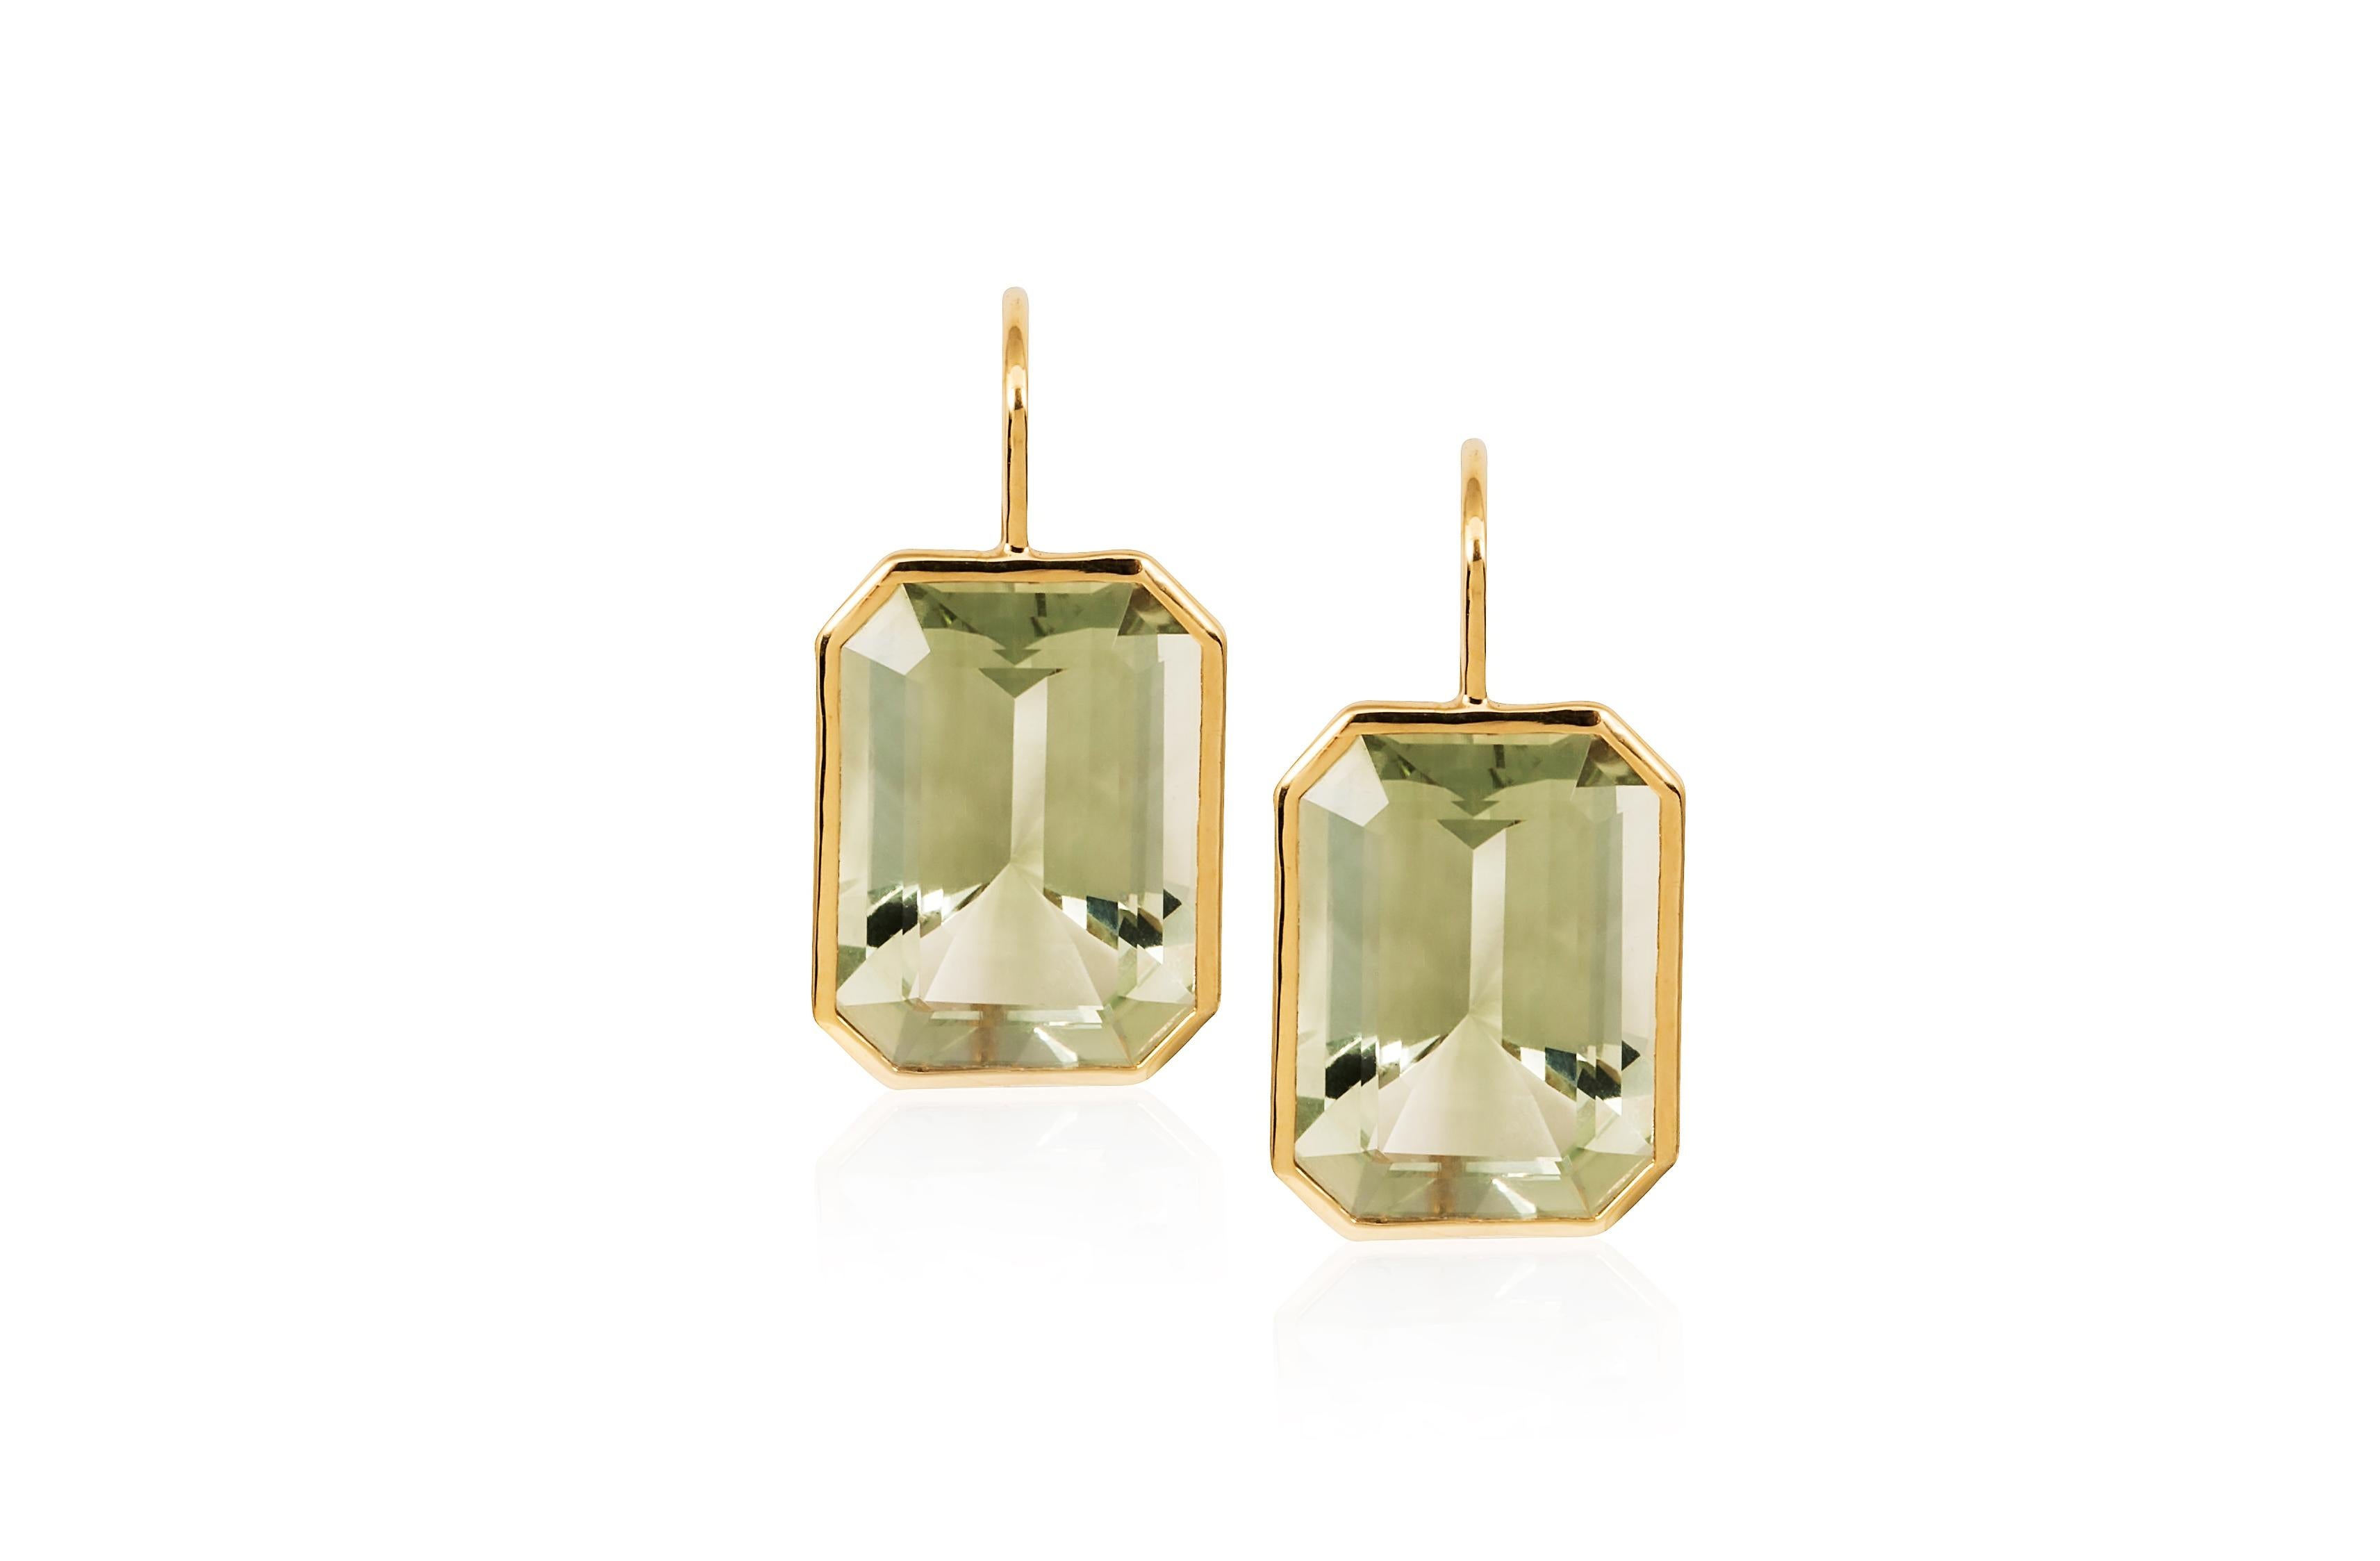 Prasiolite Emerald Cut Earrings on Wire in 18K Yellow Gold from 'Gossip' Collection

Stone Size: 15 x 10 mm